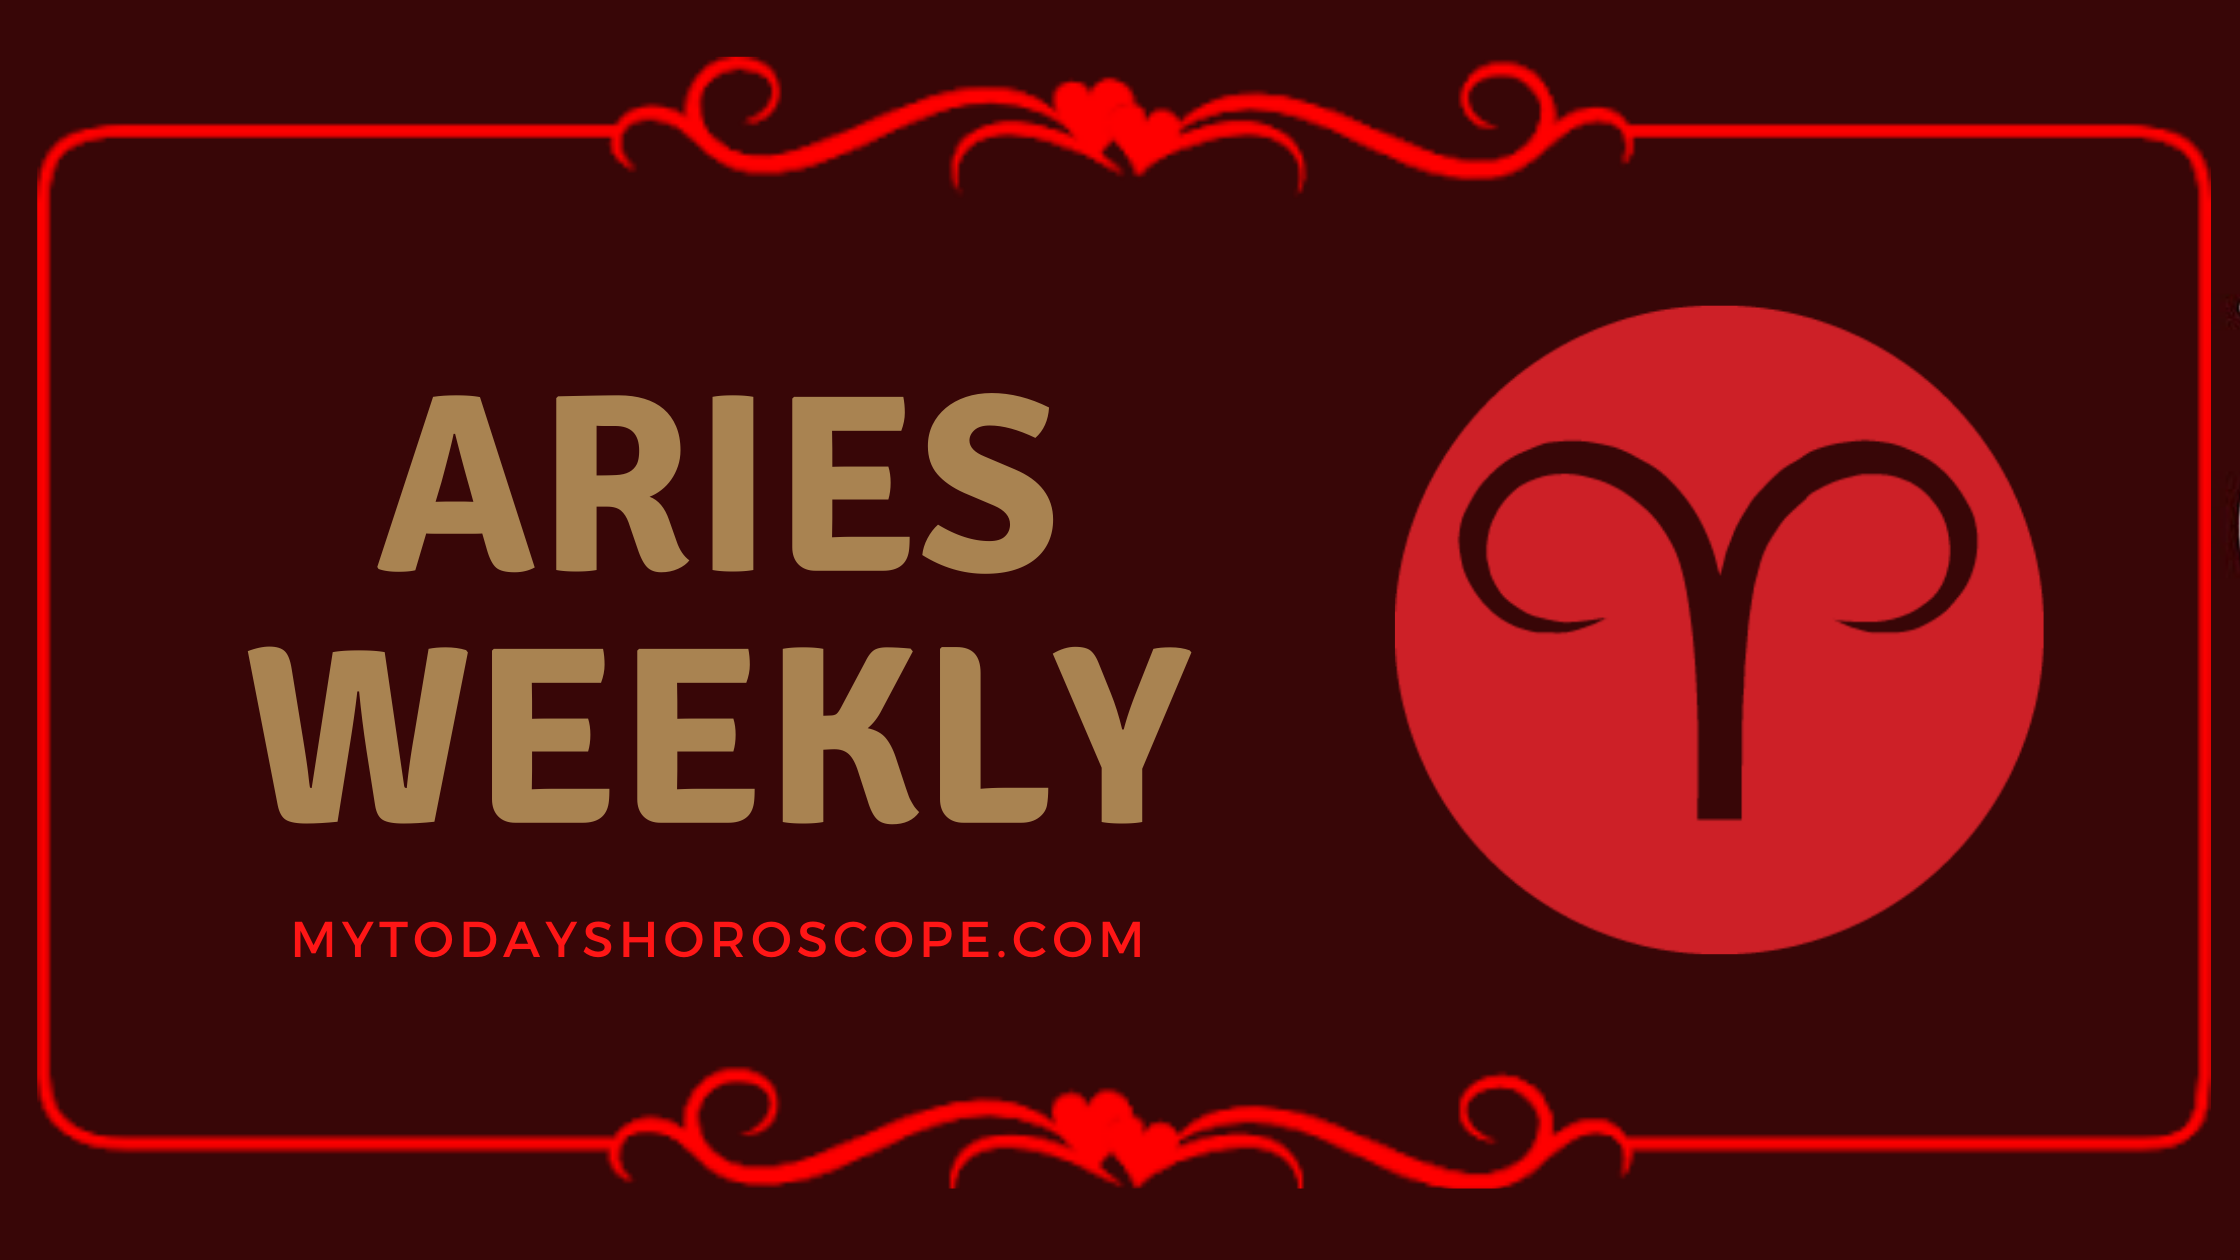 Aries Weekly Horoscope for Love, Work and Well-being